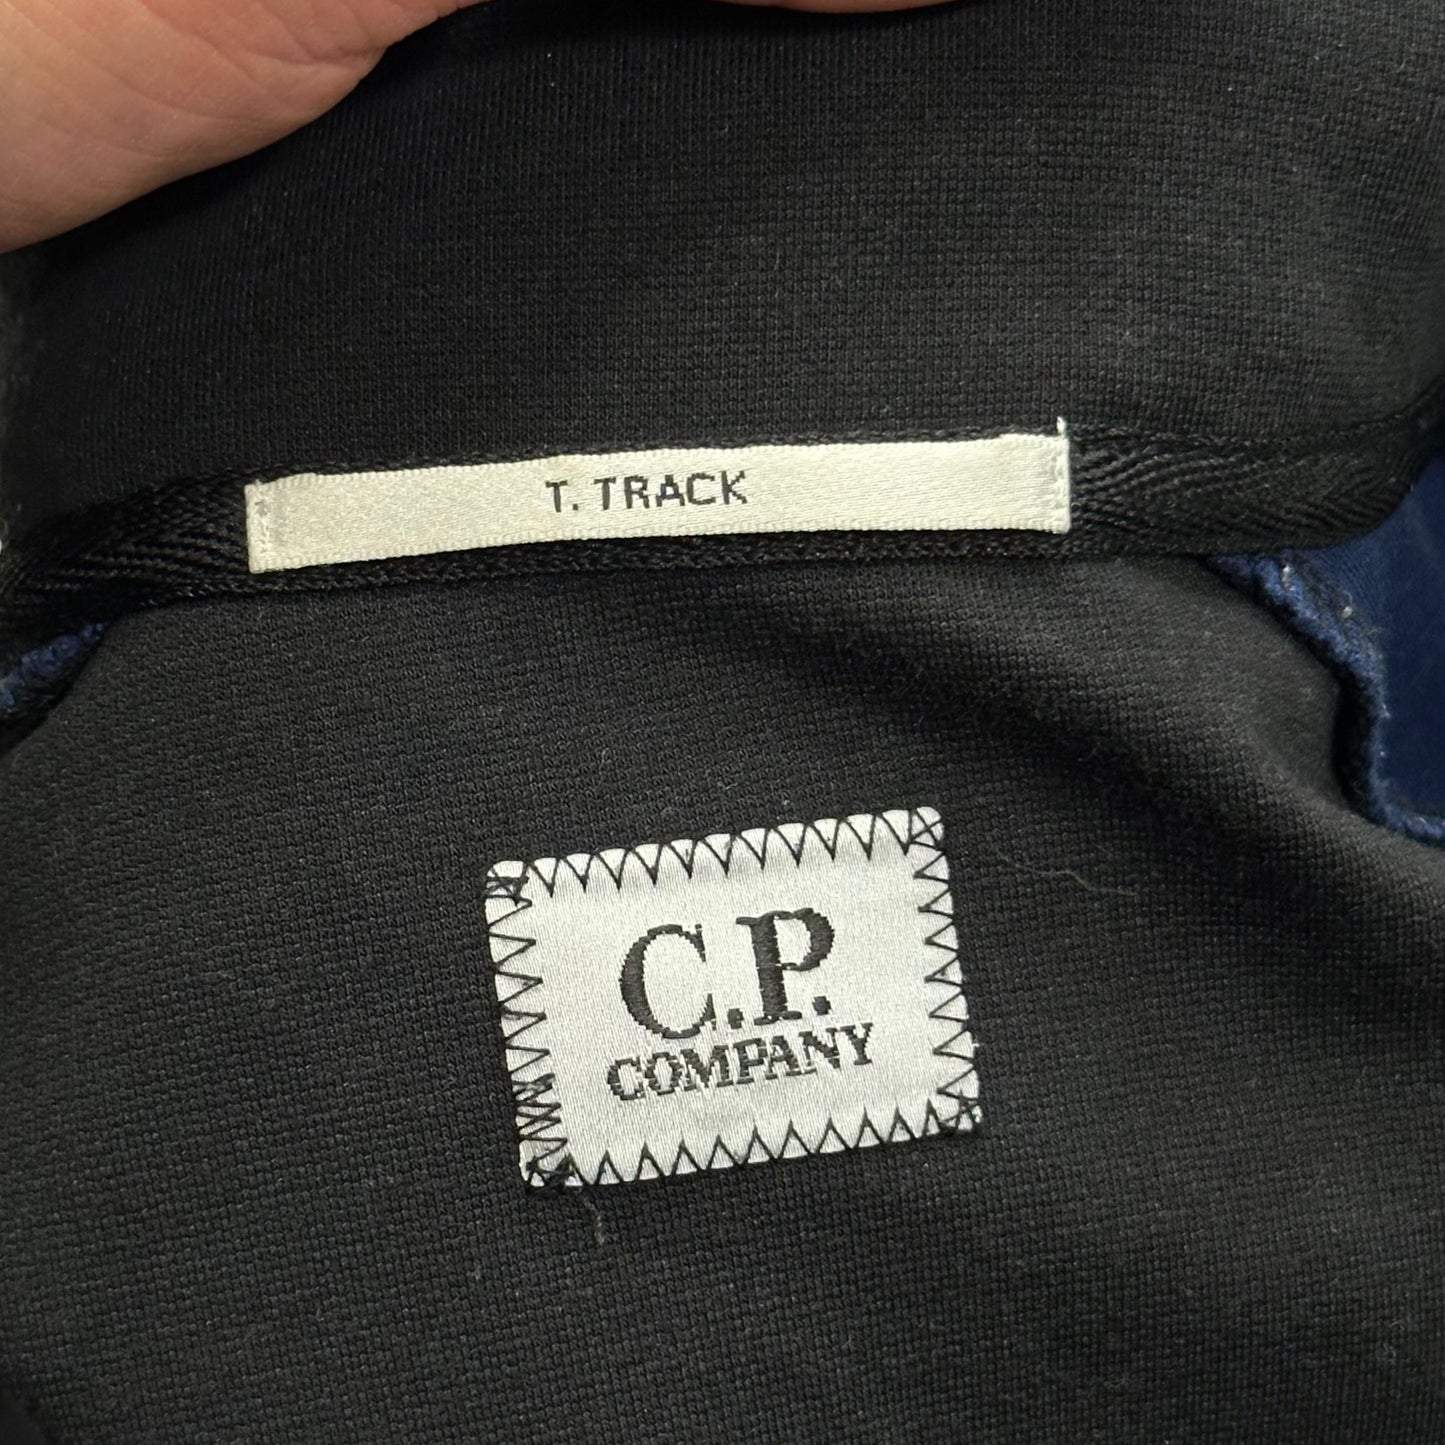 CP Company T.track Panelled Lens Jacket - M